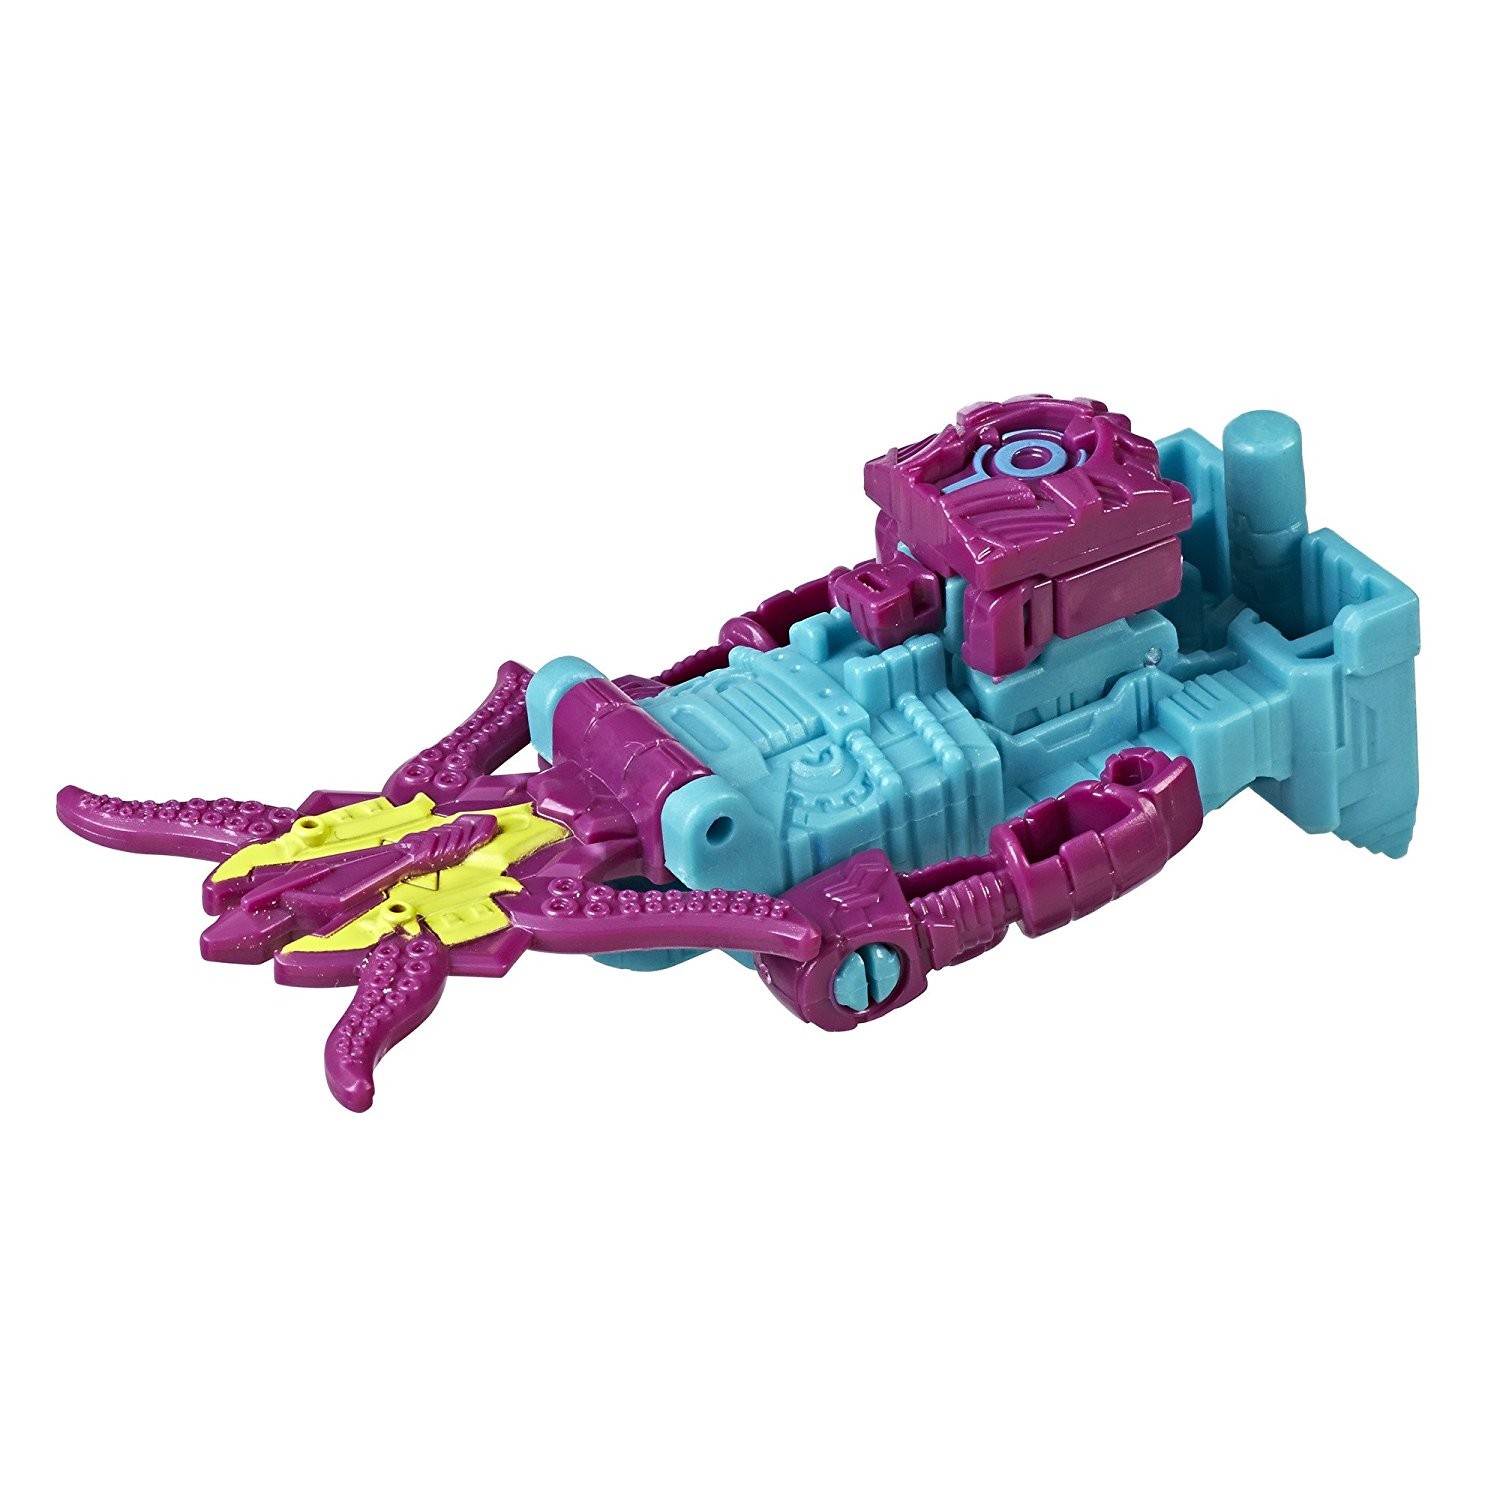 Transformers News: New Stock Images of Transformers: Power of the Primes Megatronus, Quintus and Solus Prime